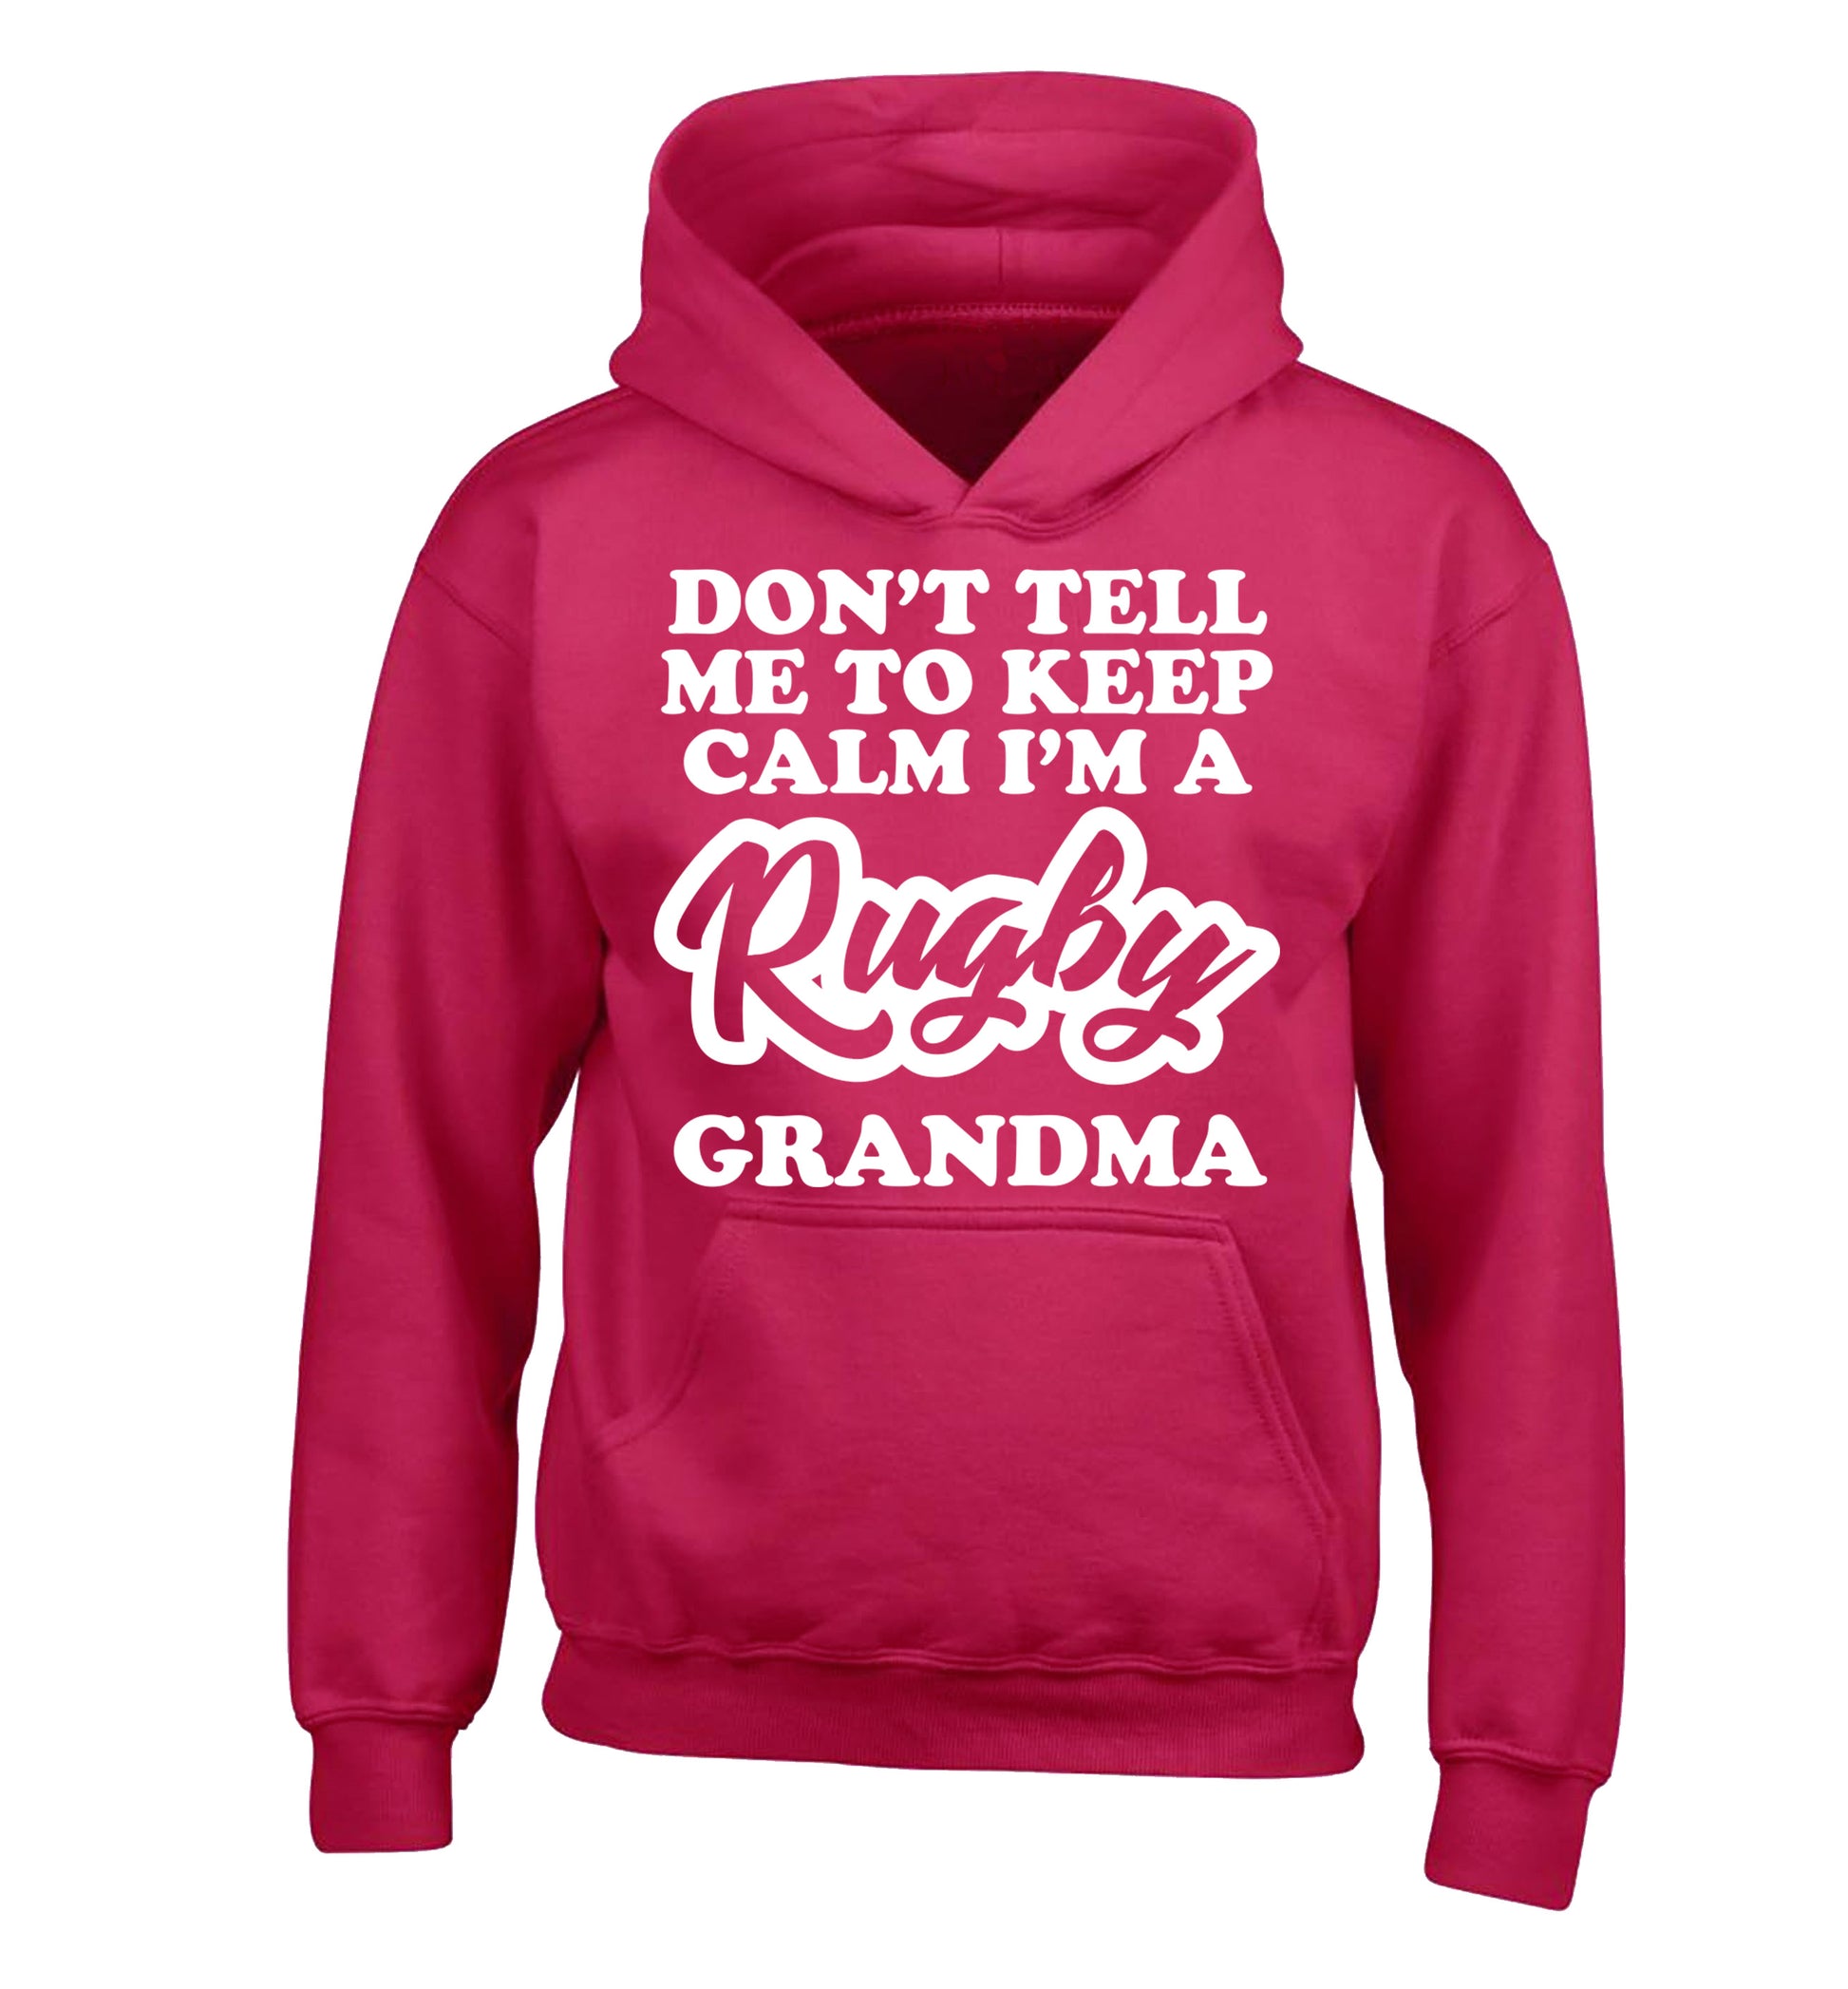 Don't tell me to keep calm I'm a rugby grandma children's pink hoodie 12-13 Years